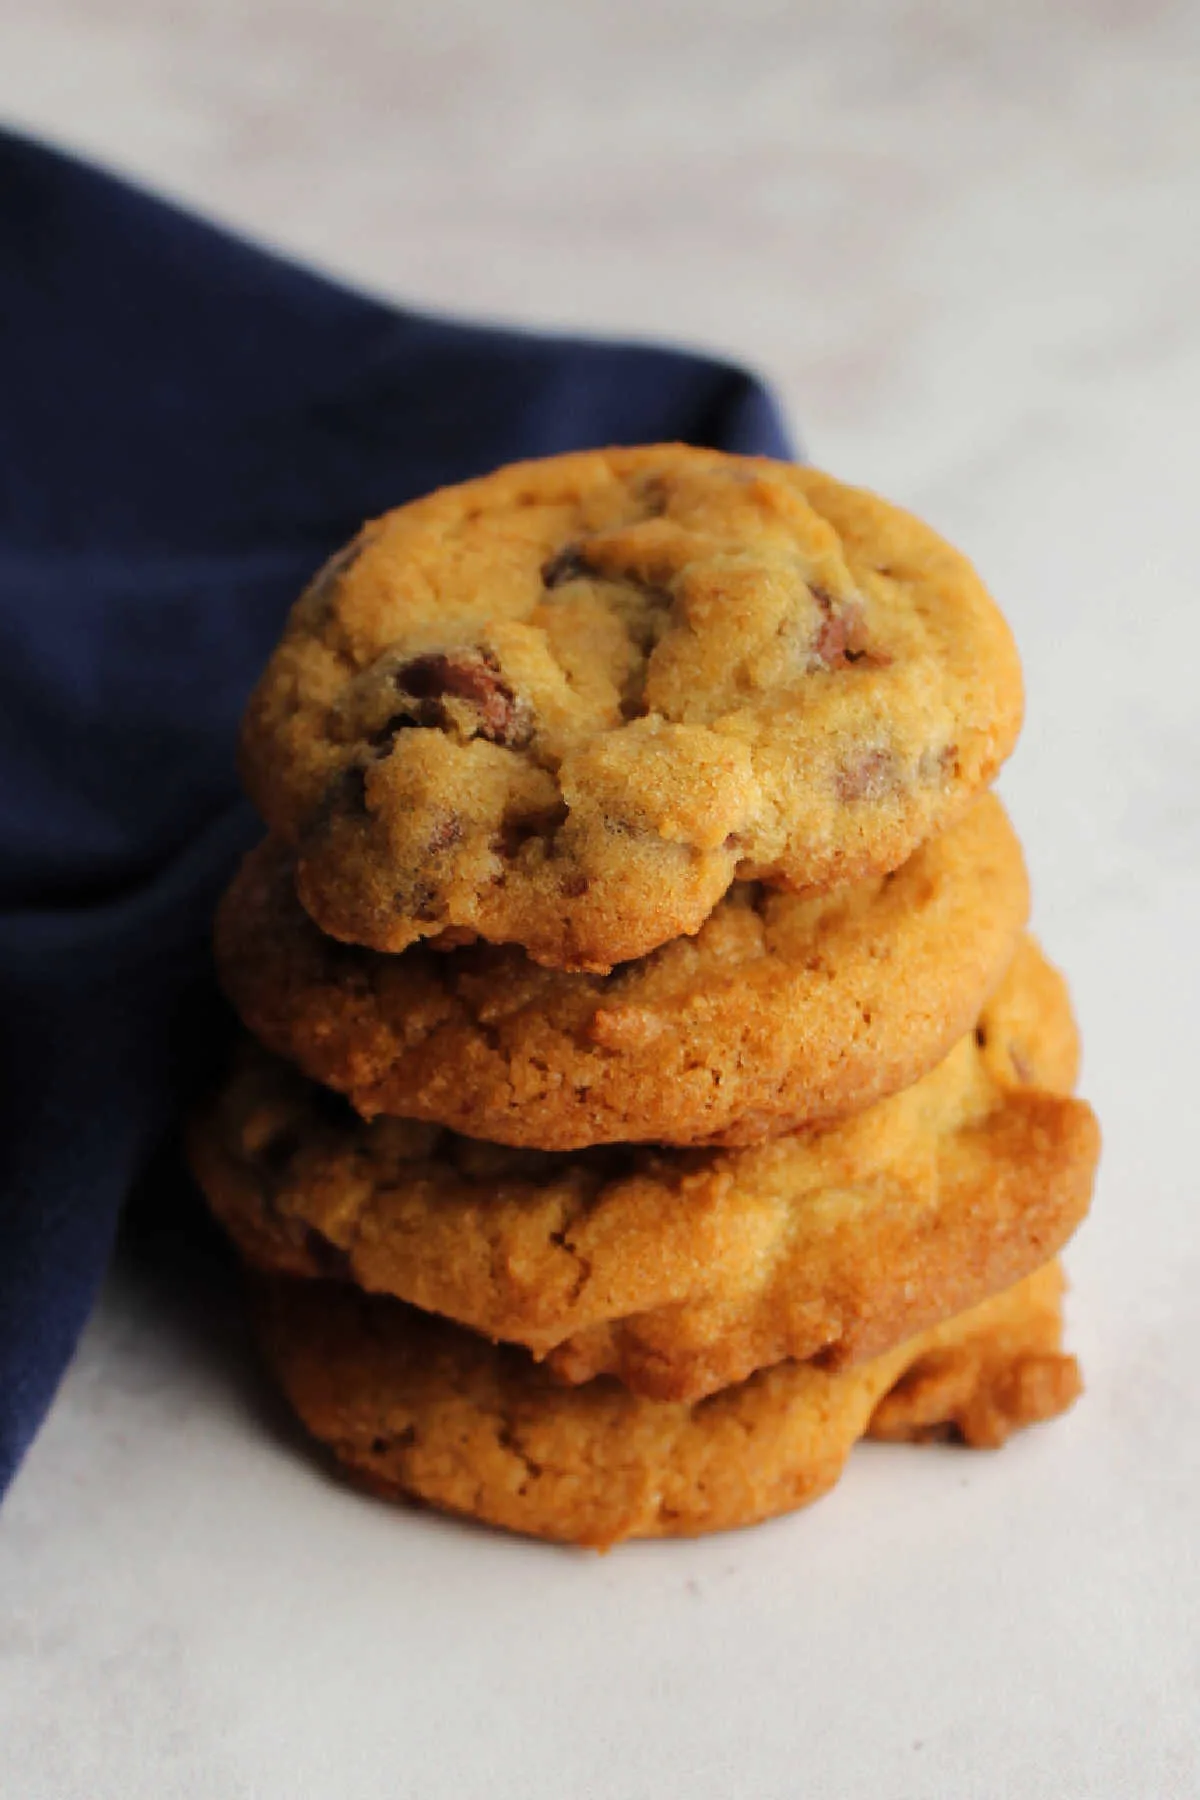 Stack of golden brown chocolate chip cookies ready to eat.